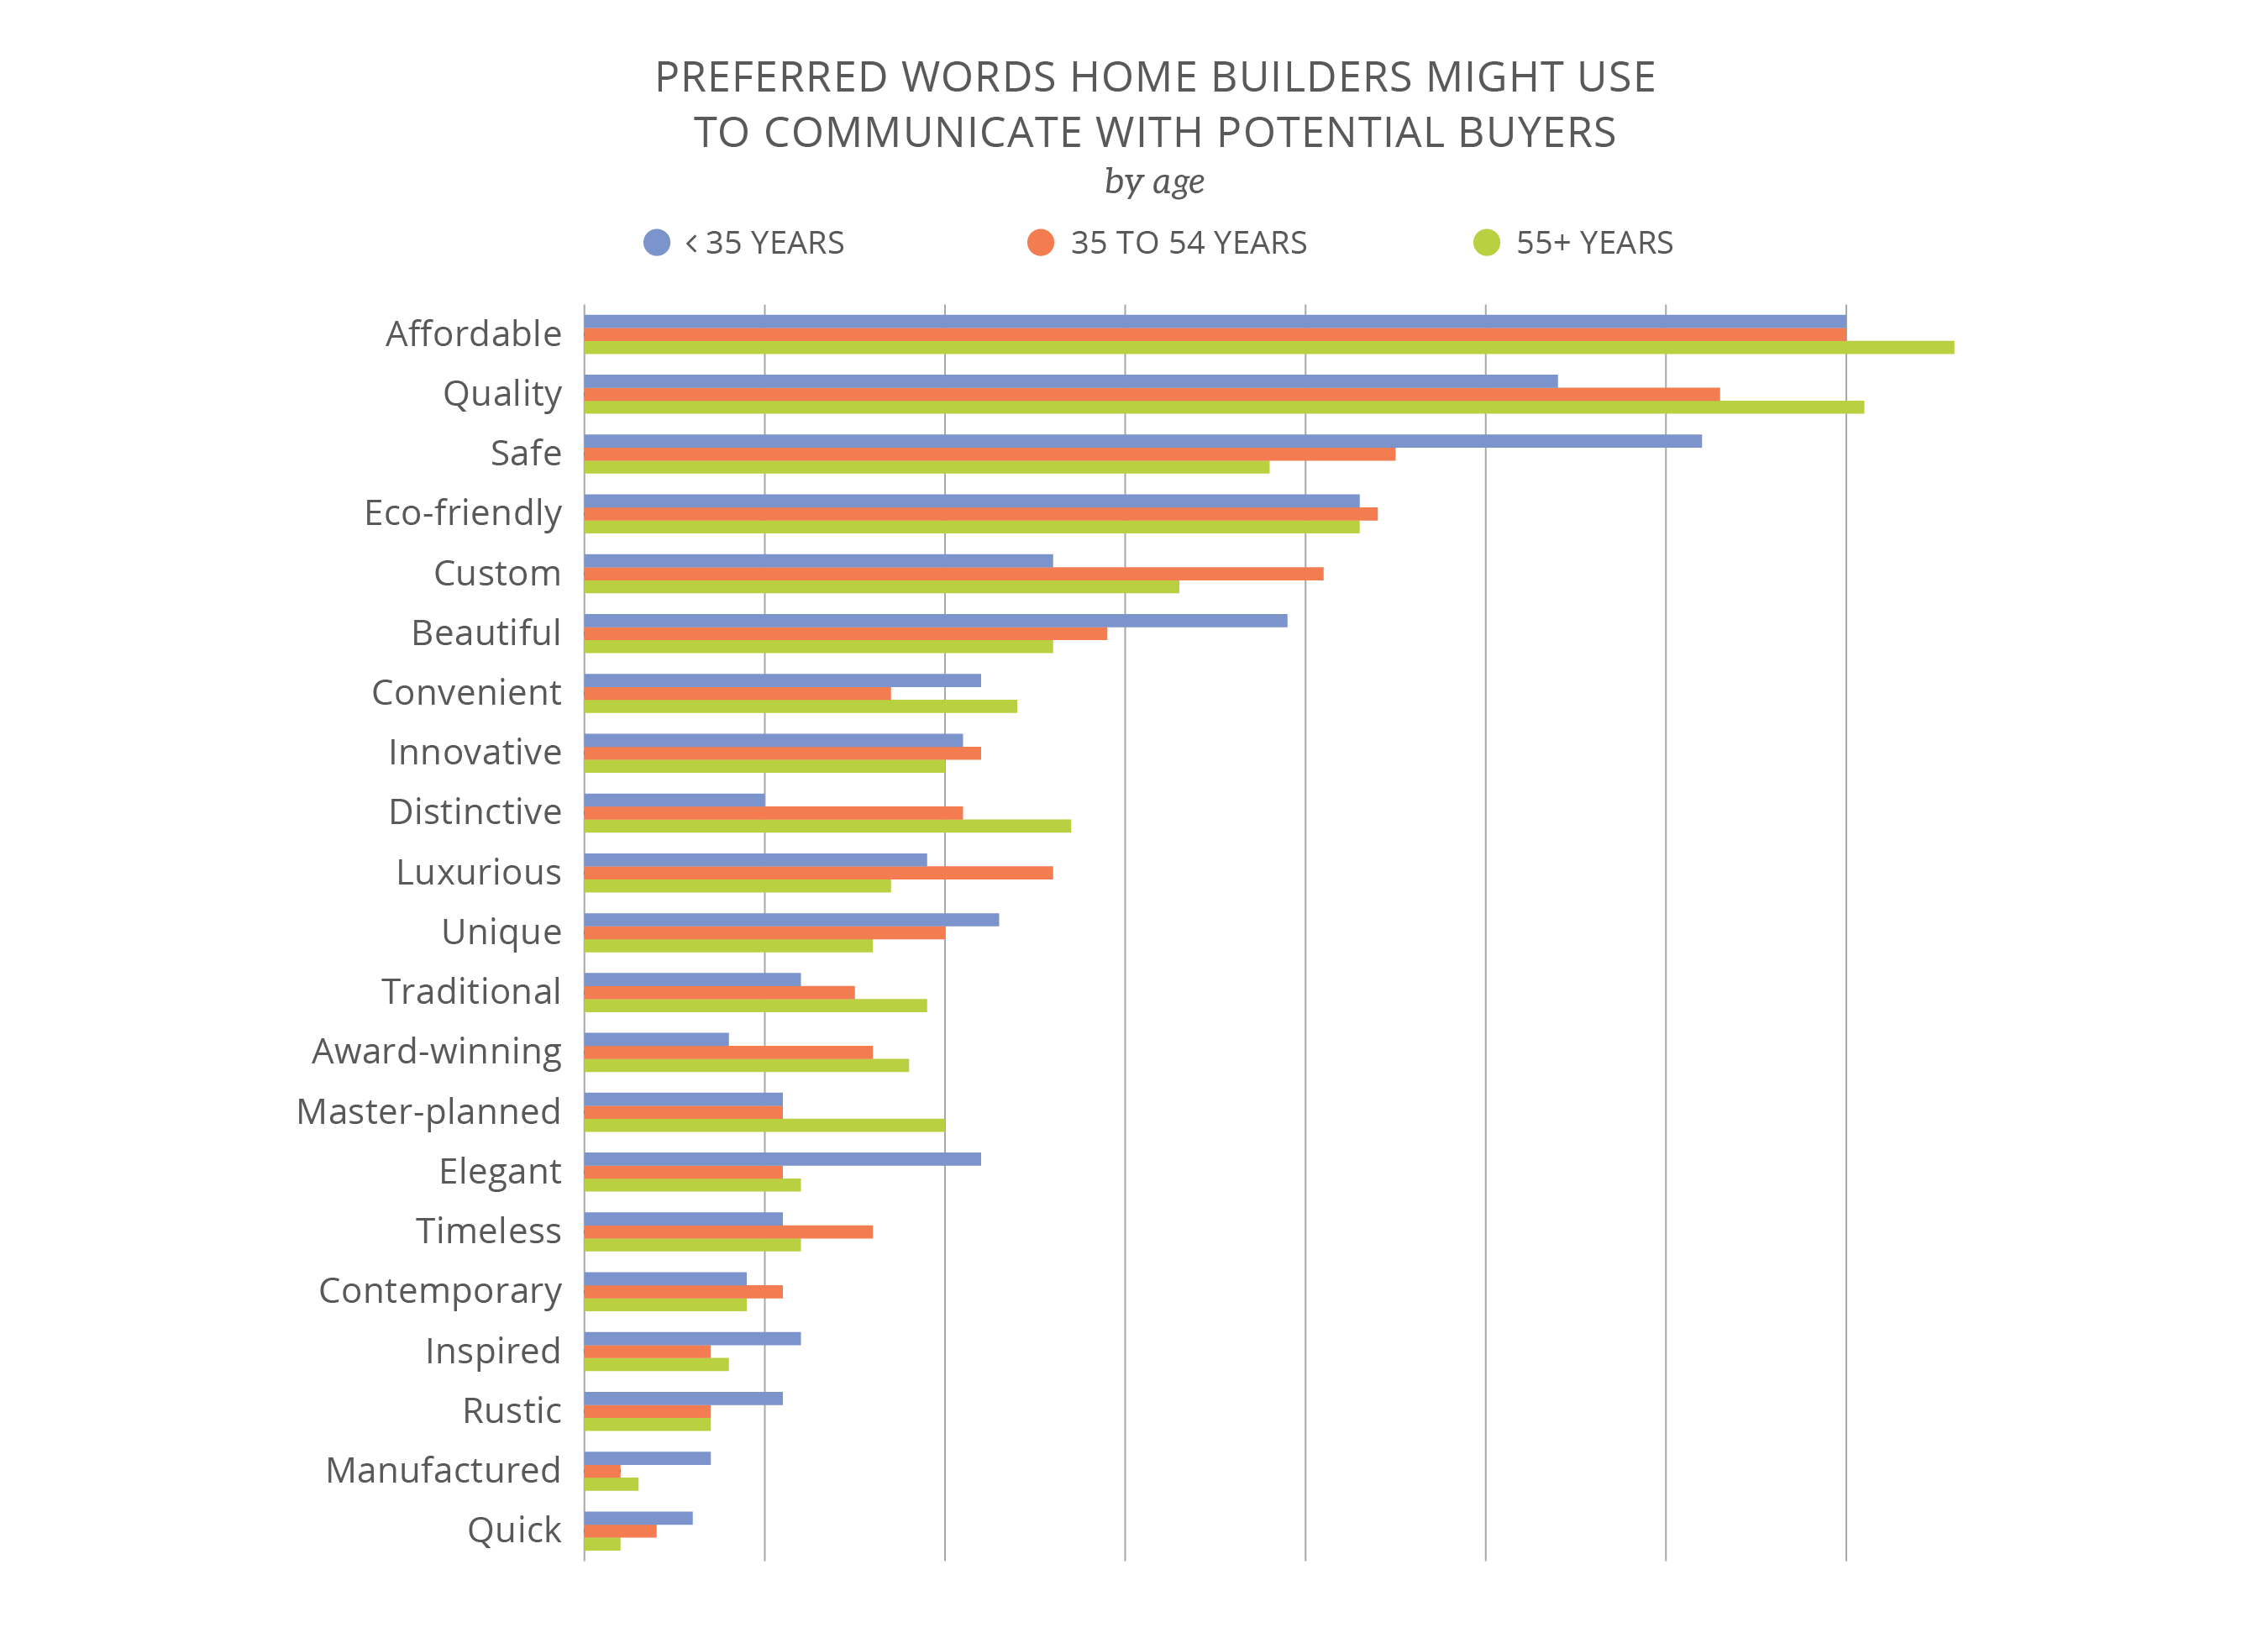 Age influences the words home buyers prefer in marketing materials.